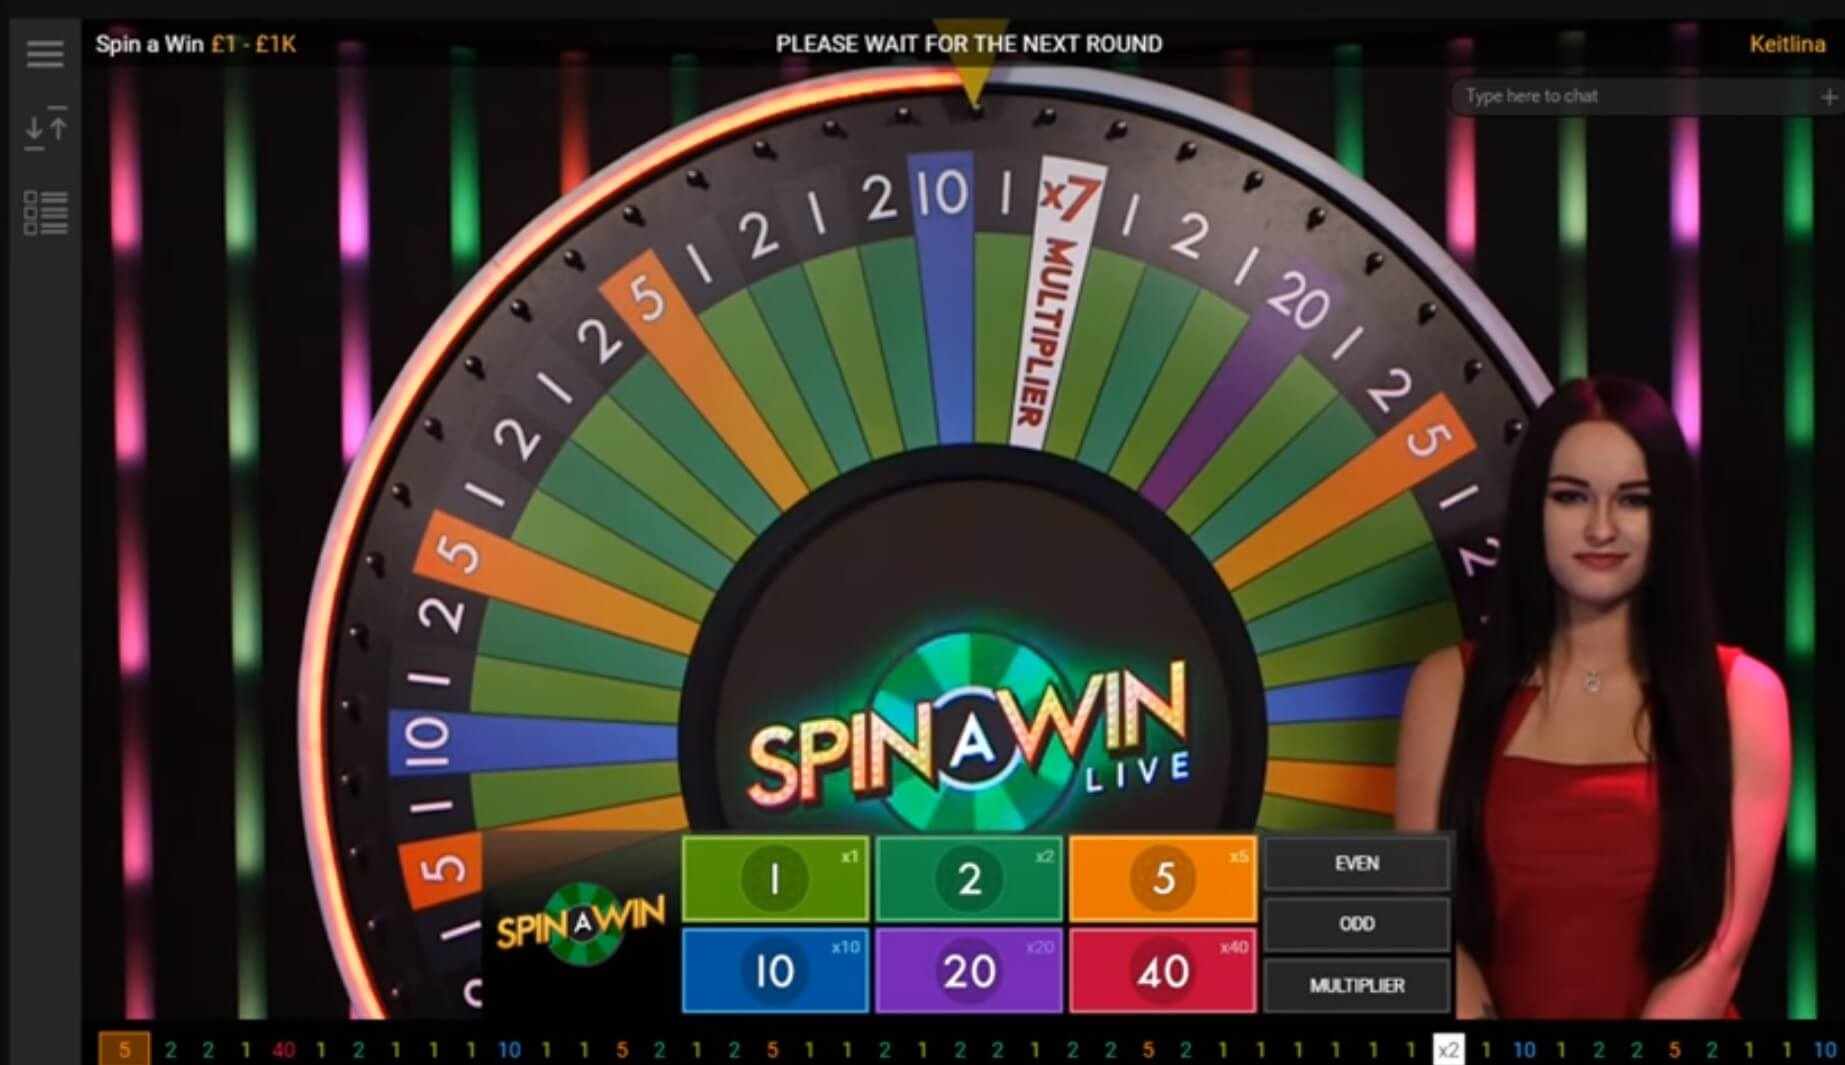 Spin a win